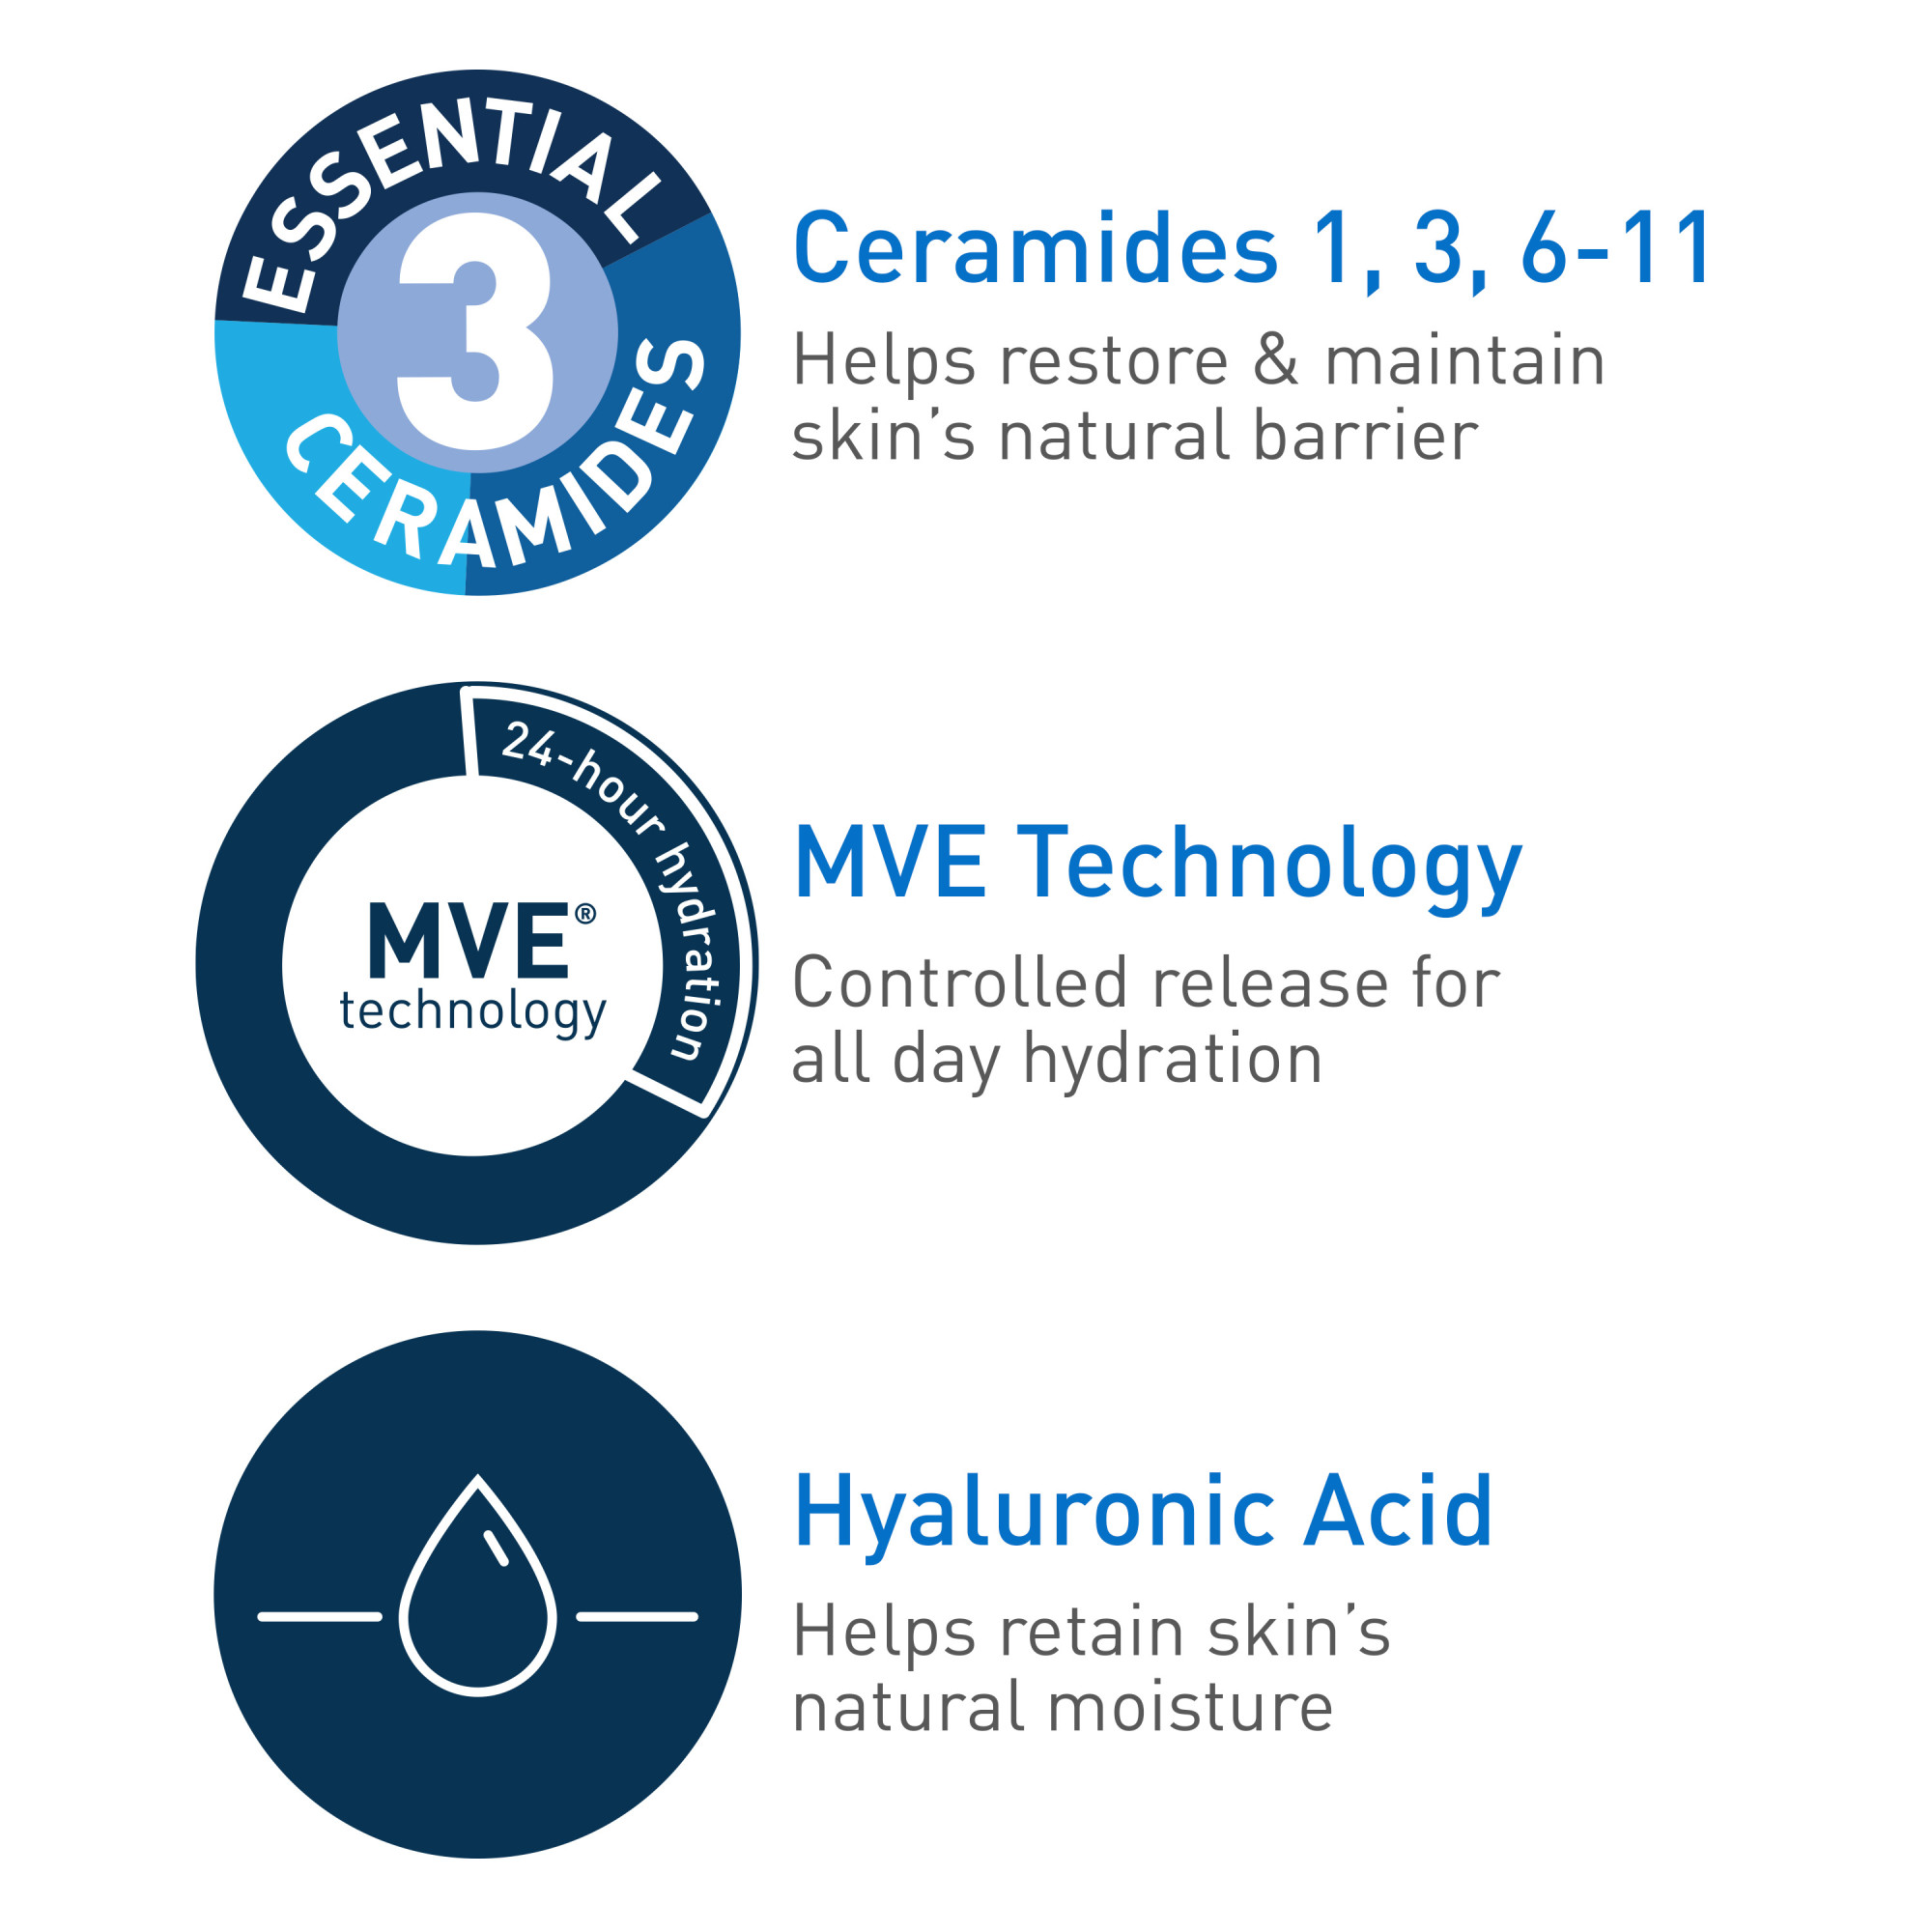 CeraVe Moisturizing Cream, Face & Body Moisturizer for Normal to Very Dry Skin, 16 oz - image 6 of 14